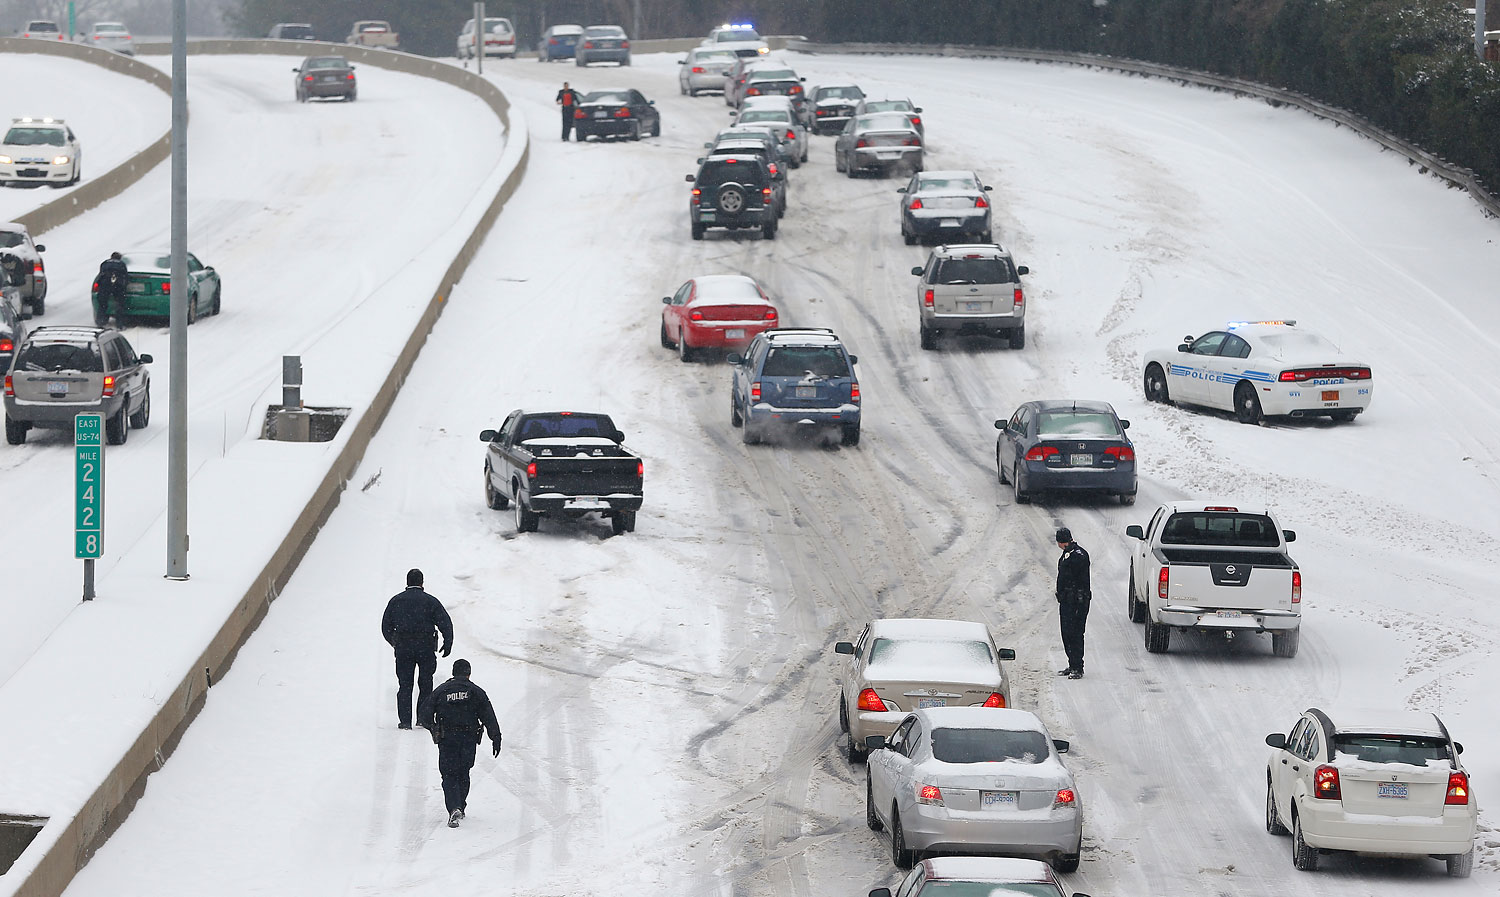 Charlotte Mecklenburg Police Officers work to assist motorists as they attempt to drive up a hill that is covered in snow in Charlotte, North Carolina Feb. 12, 2014. (Chris Keane / Reuters)